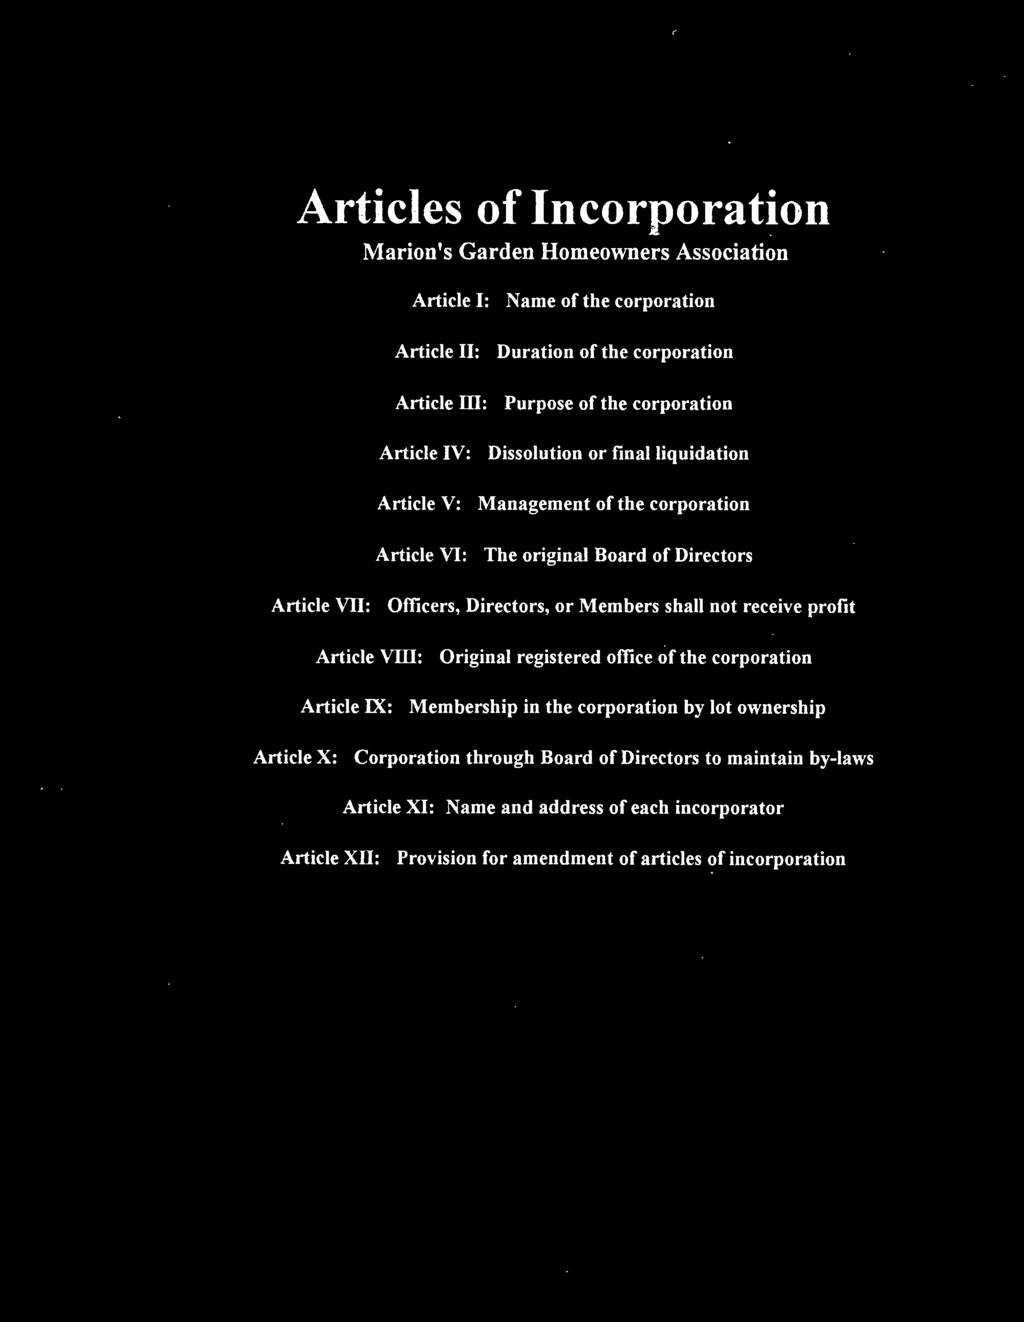 IX: Membership in the corporation by lot ownership Article X: Corporation through Board of Directors to maintain